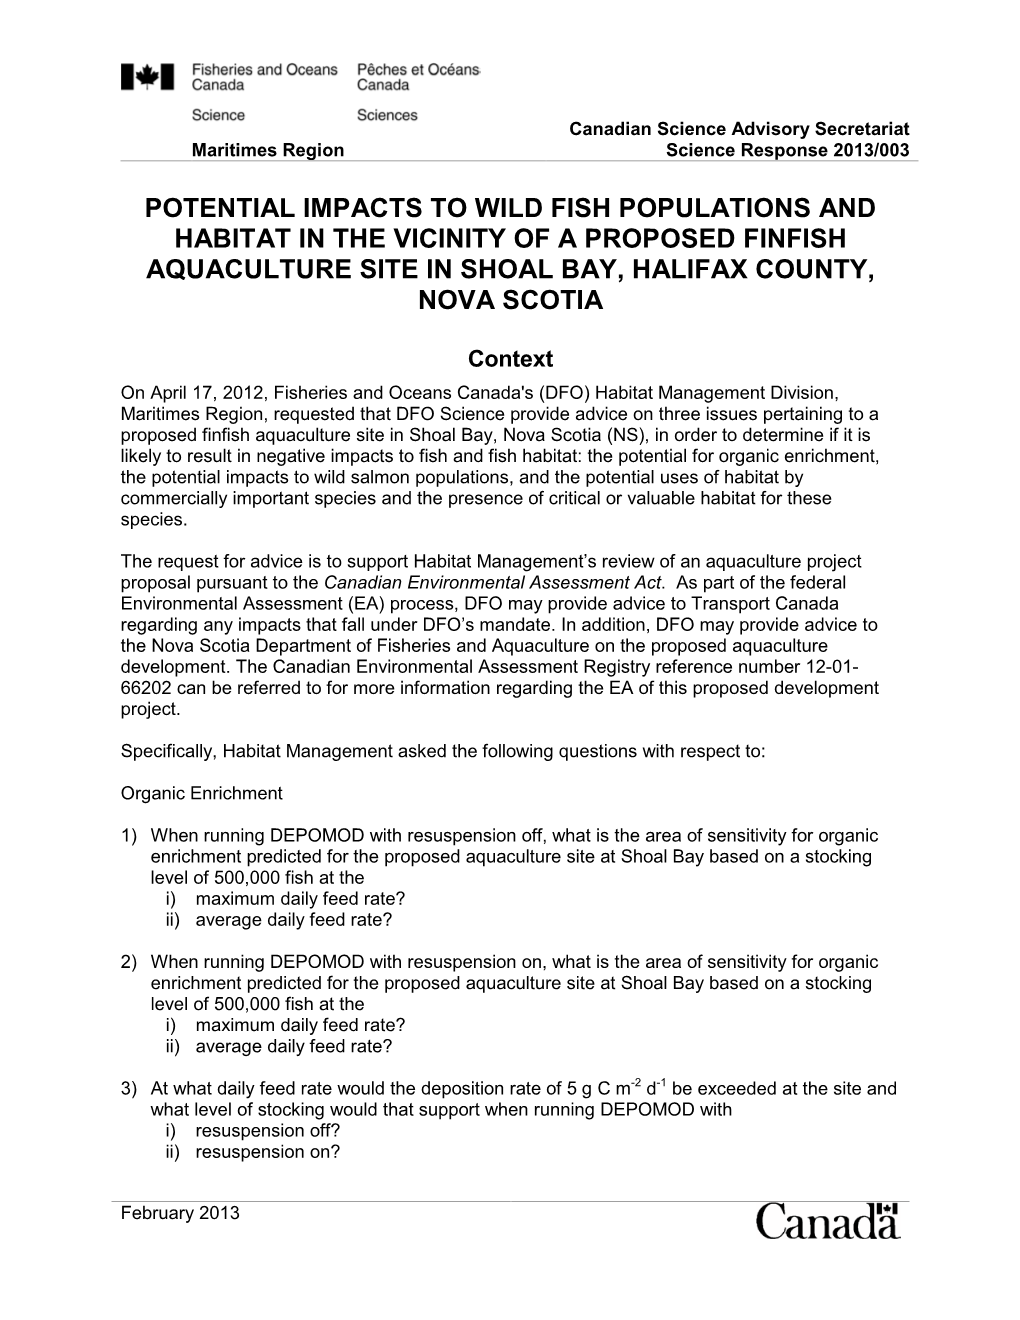 Potential Impacts to Wild Fish Populations and Habitat in the Vicinity of a Proposed Finfish Aquaculture Site in Shoal Bay, Halifax County, Nova Scotia